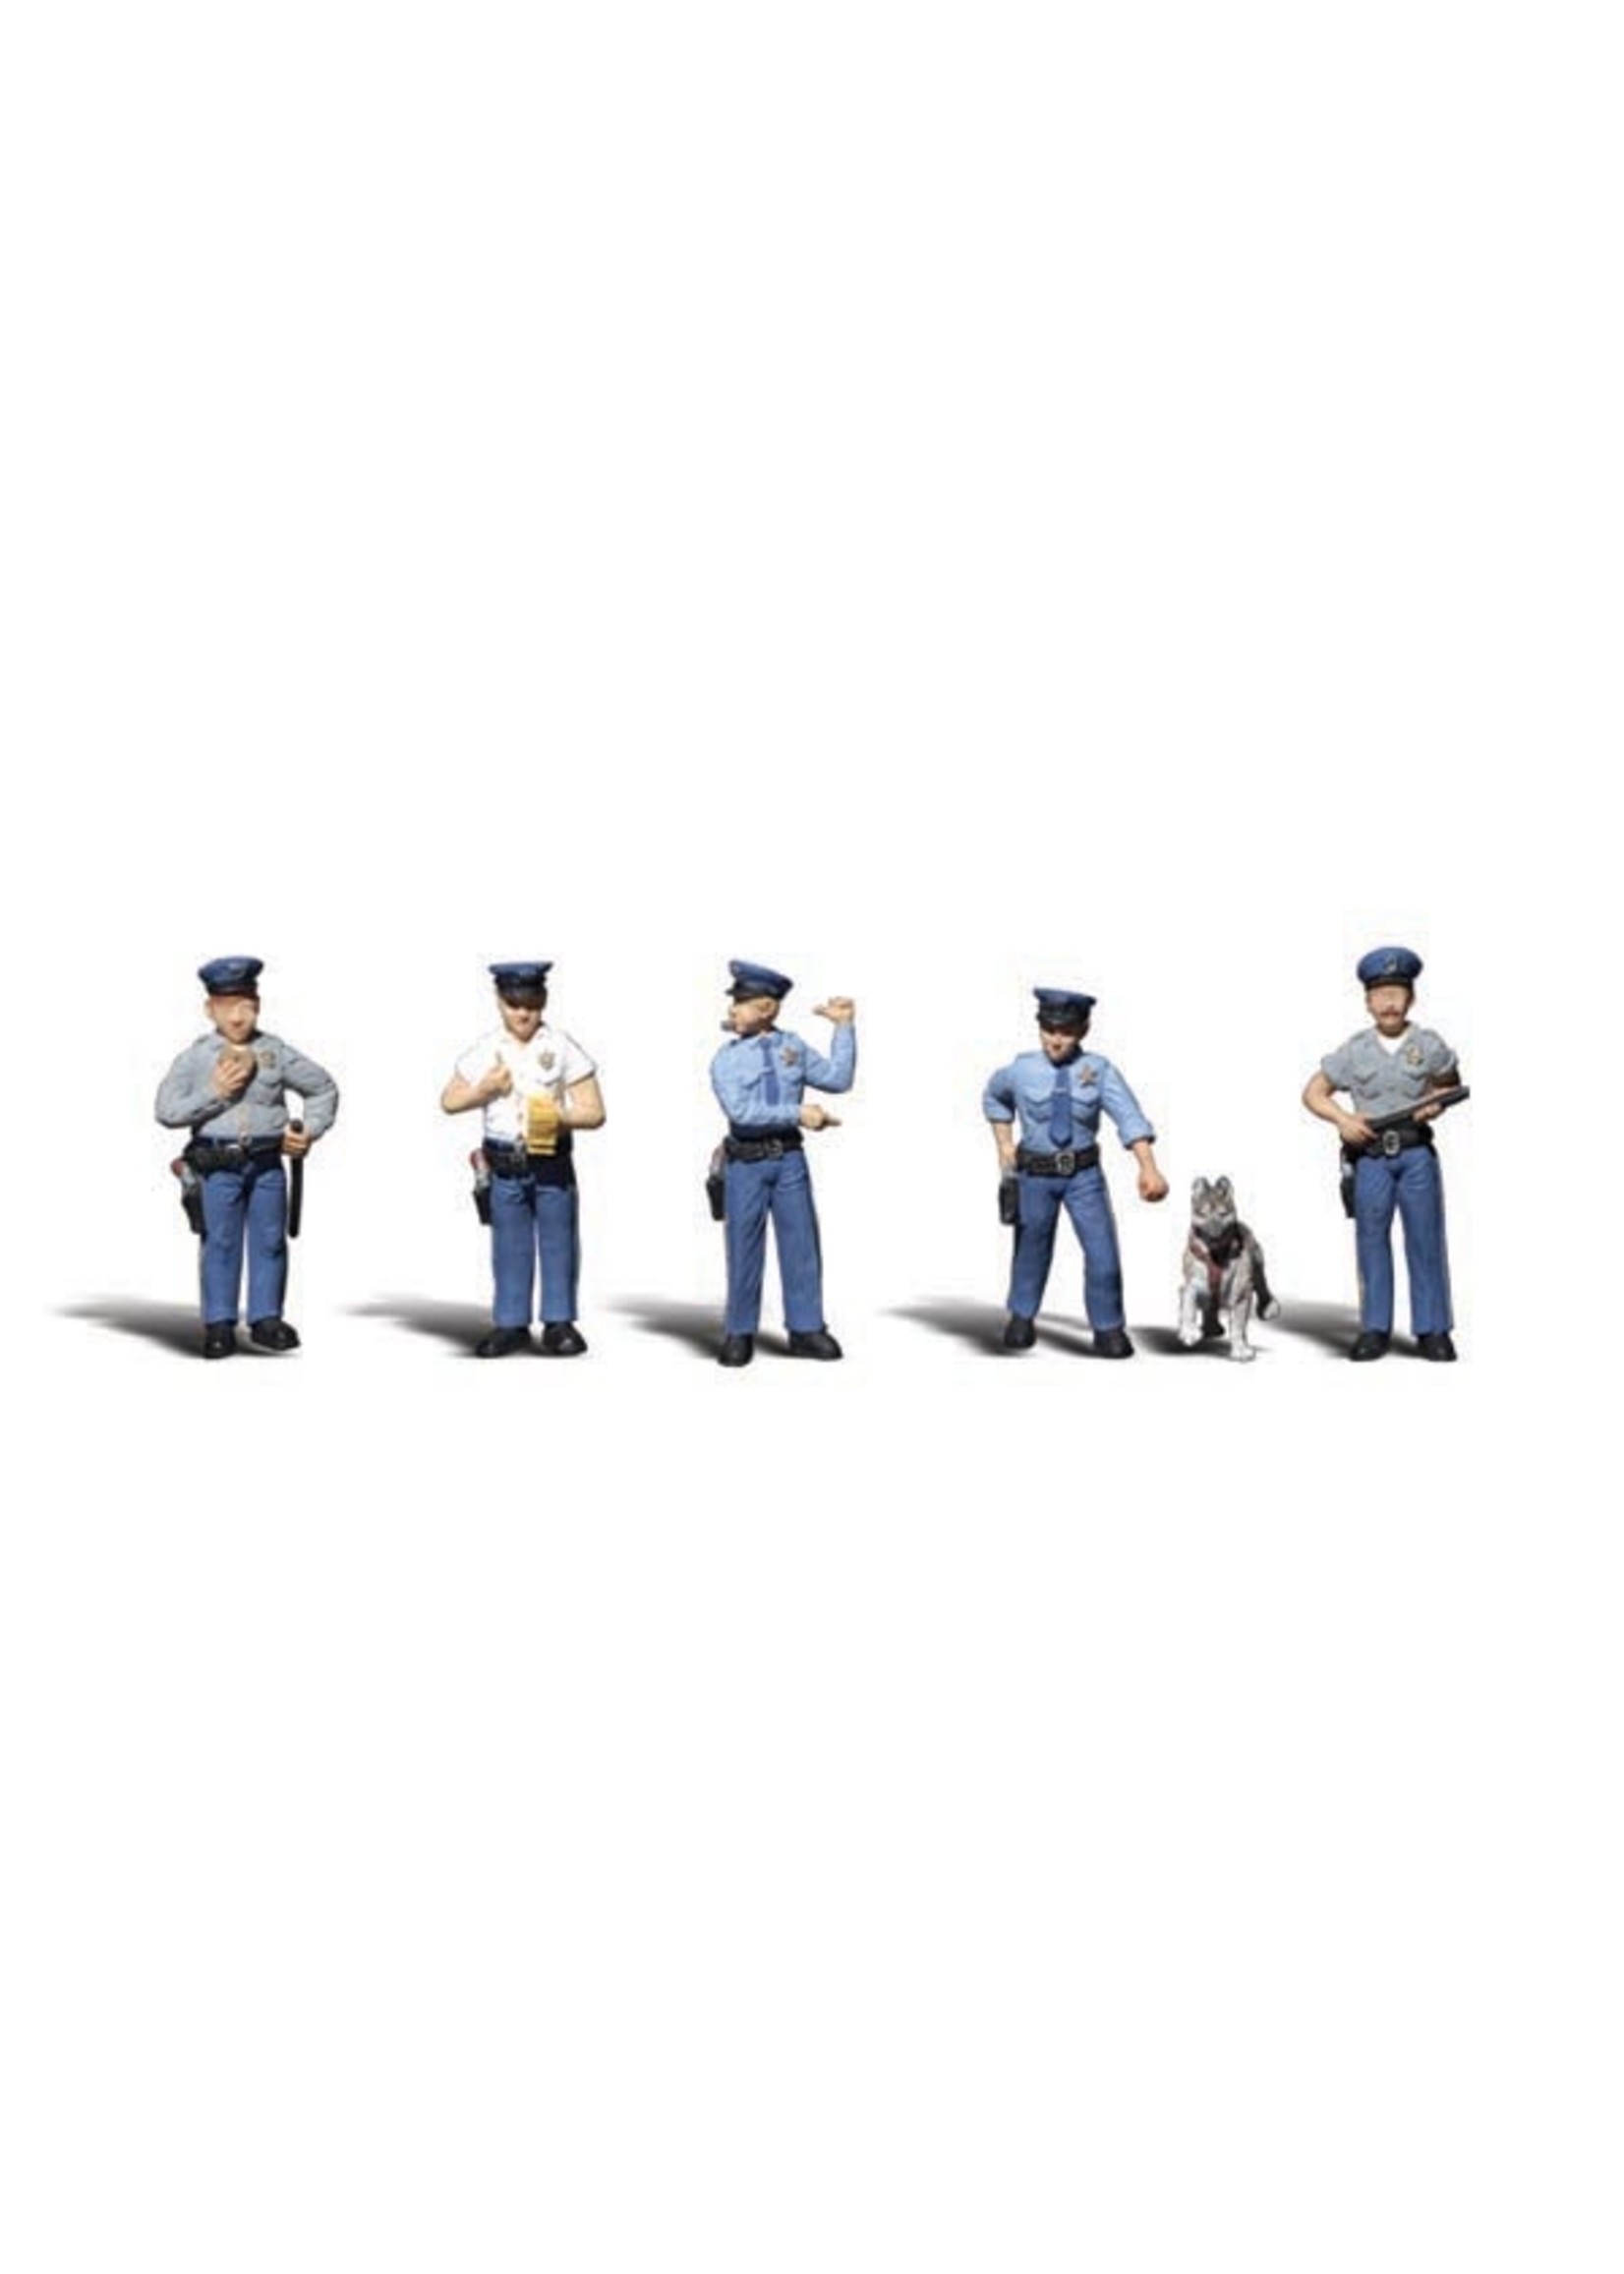 Woodland Scenics A2122 - N Scale Policemen